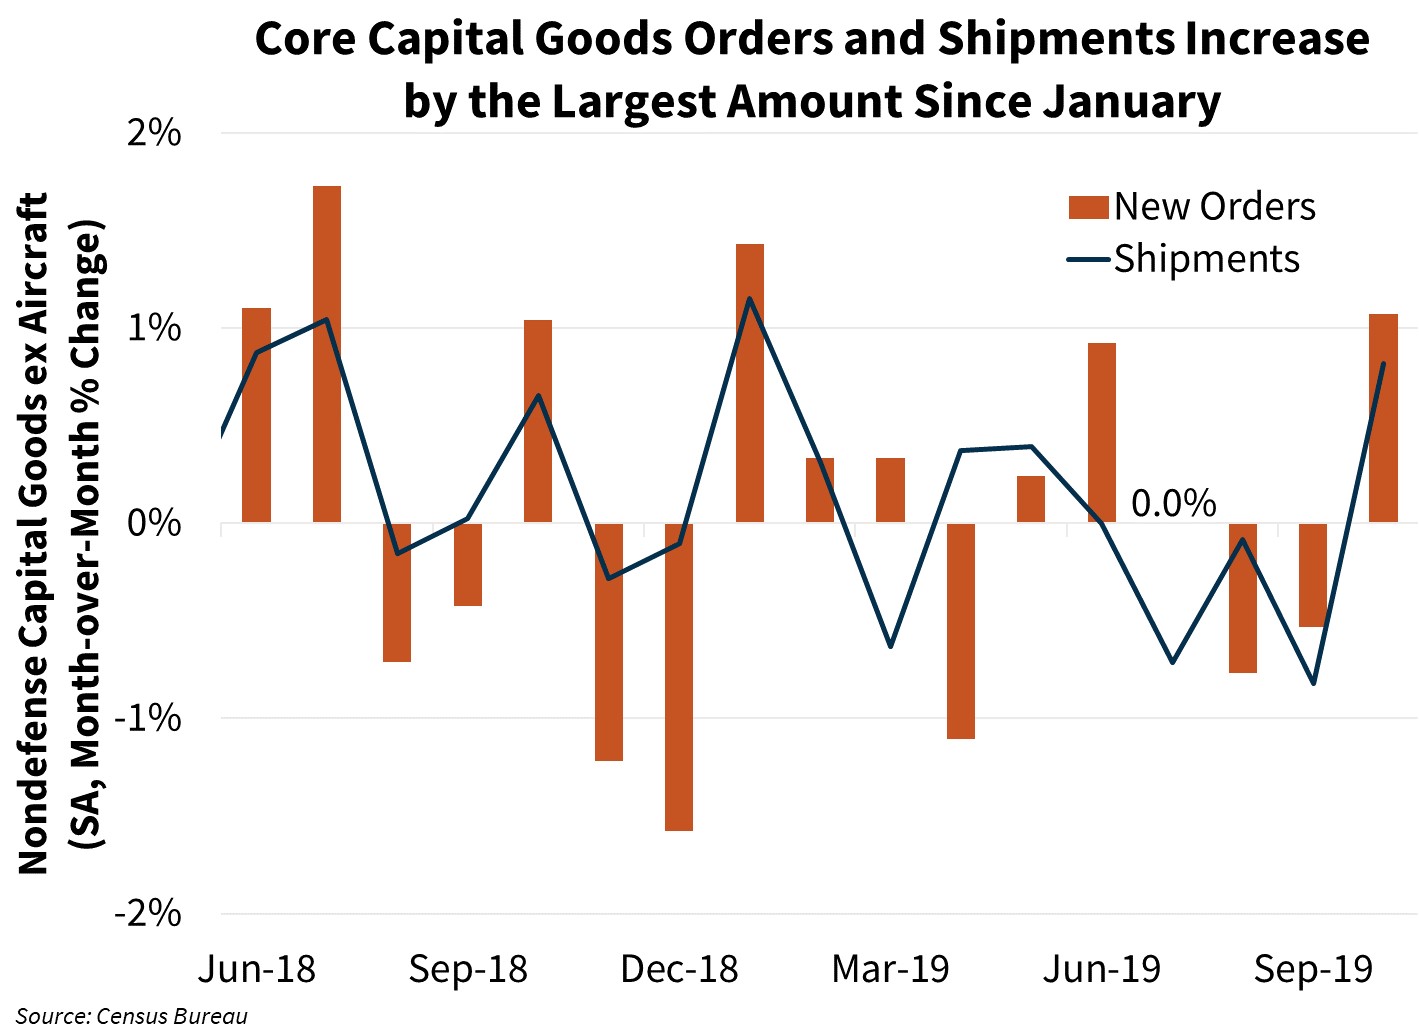 Core Capital Goods Orders and Shipments Increase by the Largest Amount Since January